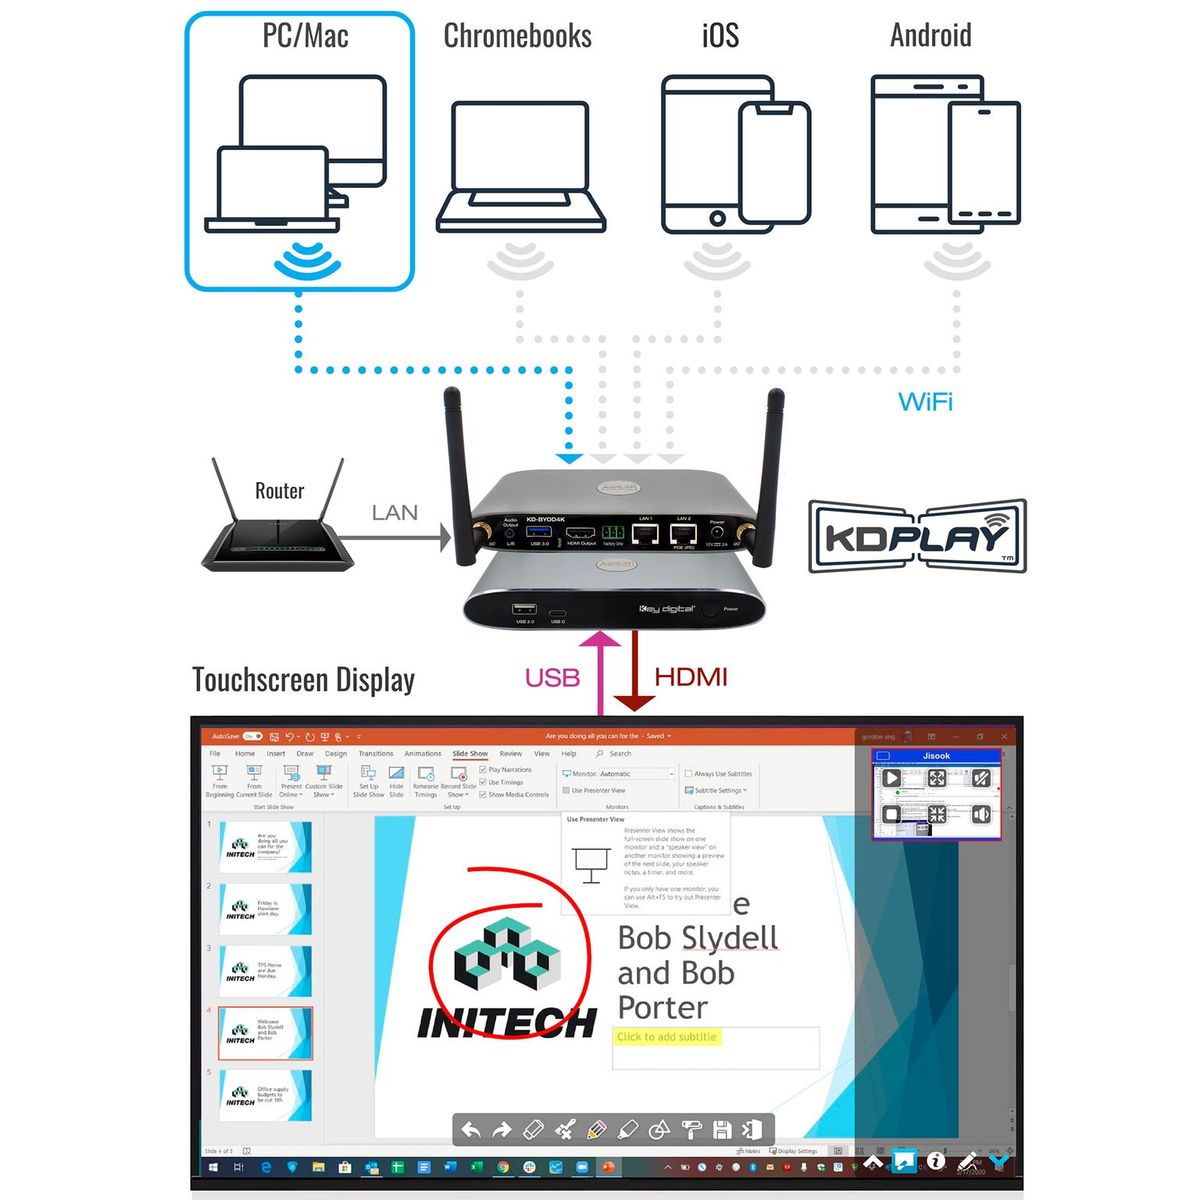 Thumbnail of Example Diagram showing presentation through the wireless presentation system